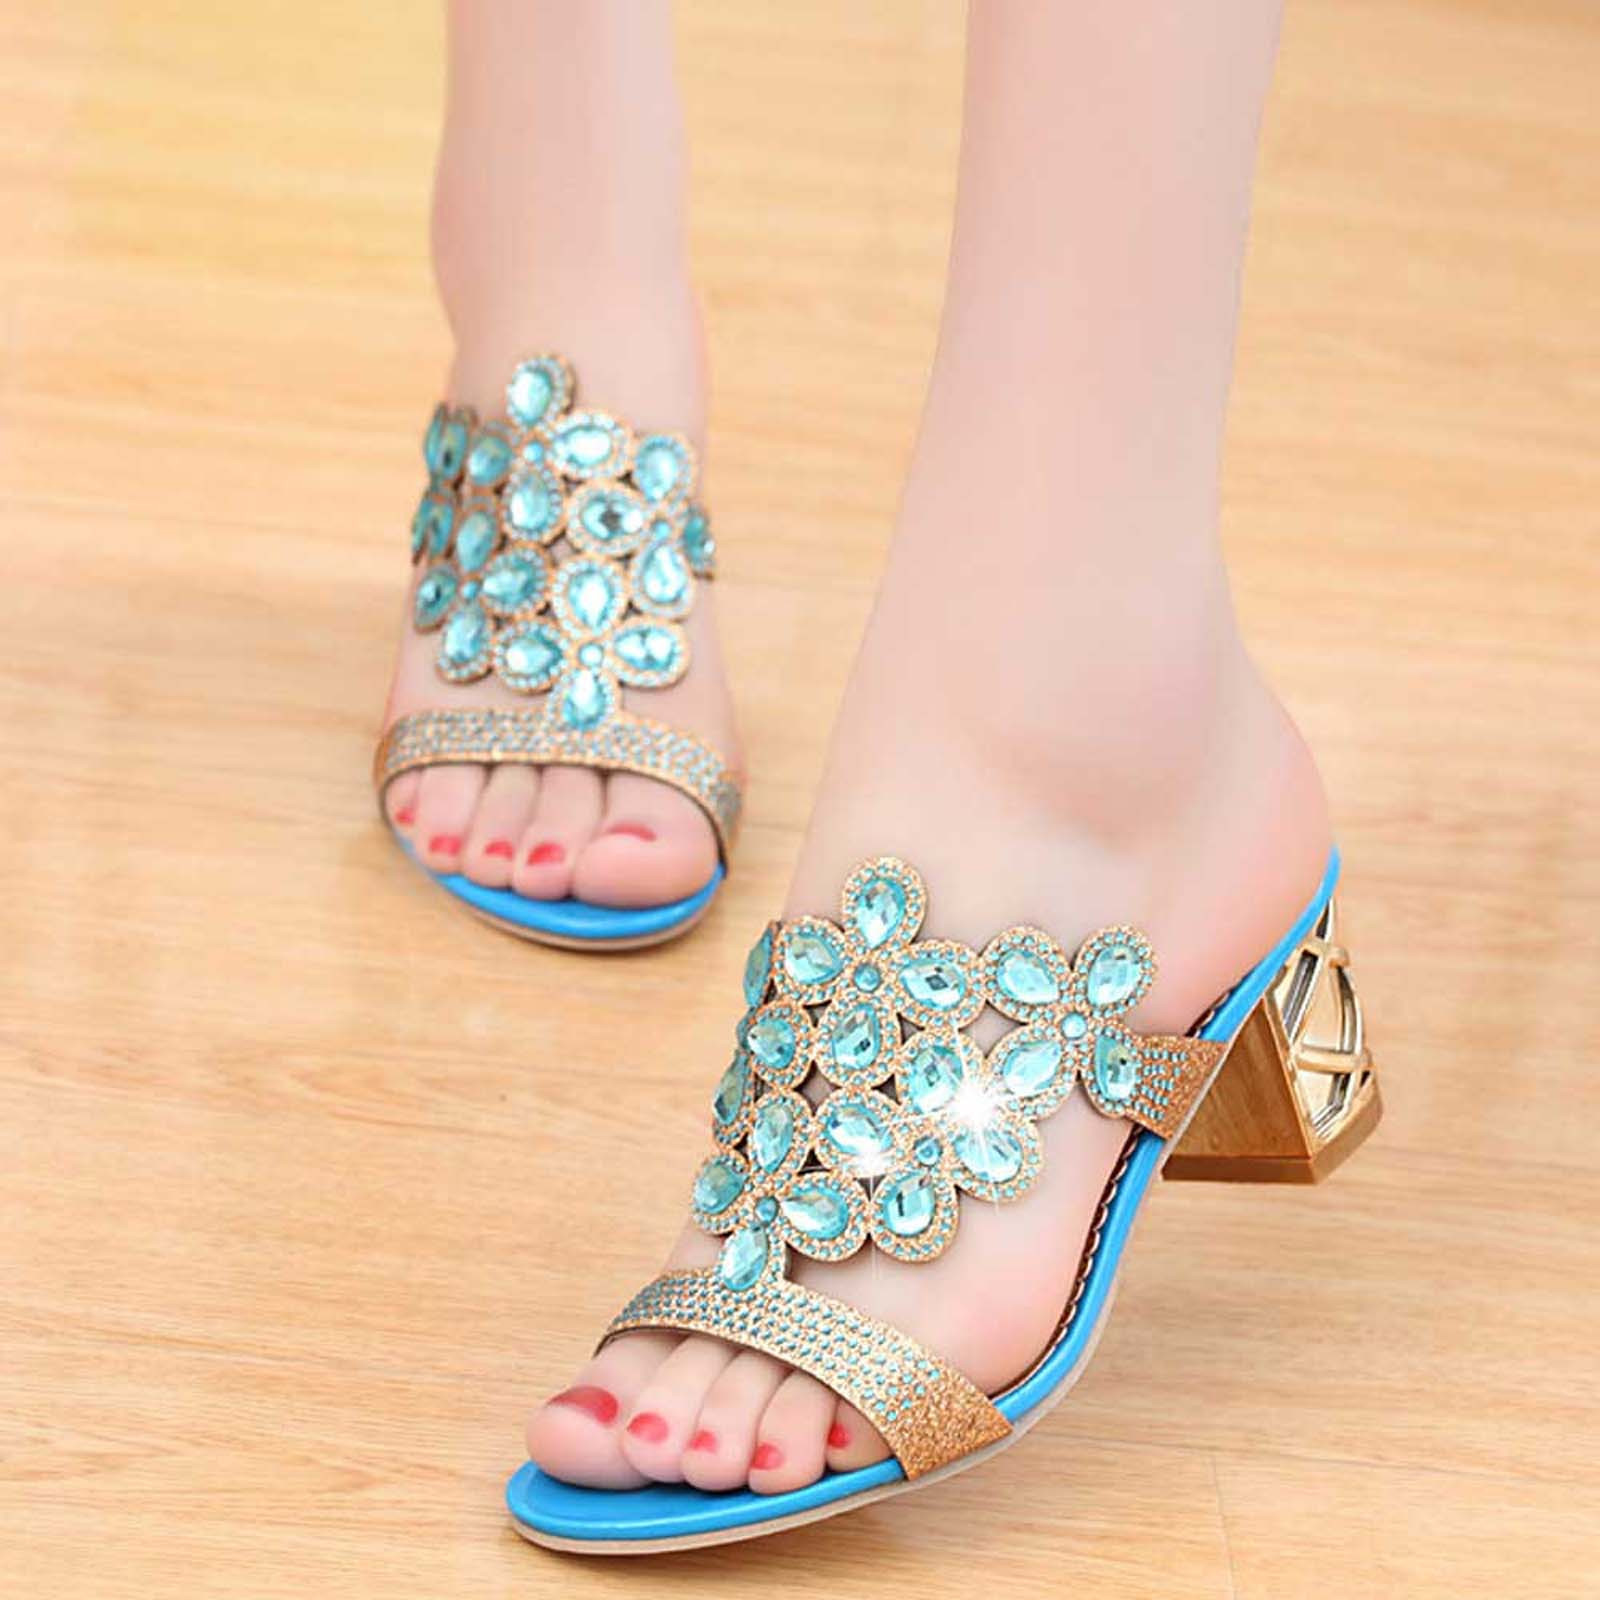 Miluxas Sparkly Rhinestone Sandals for Women Clearance,Fashion Flip ...